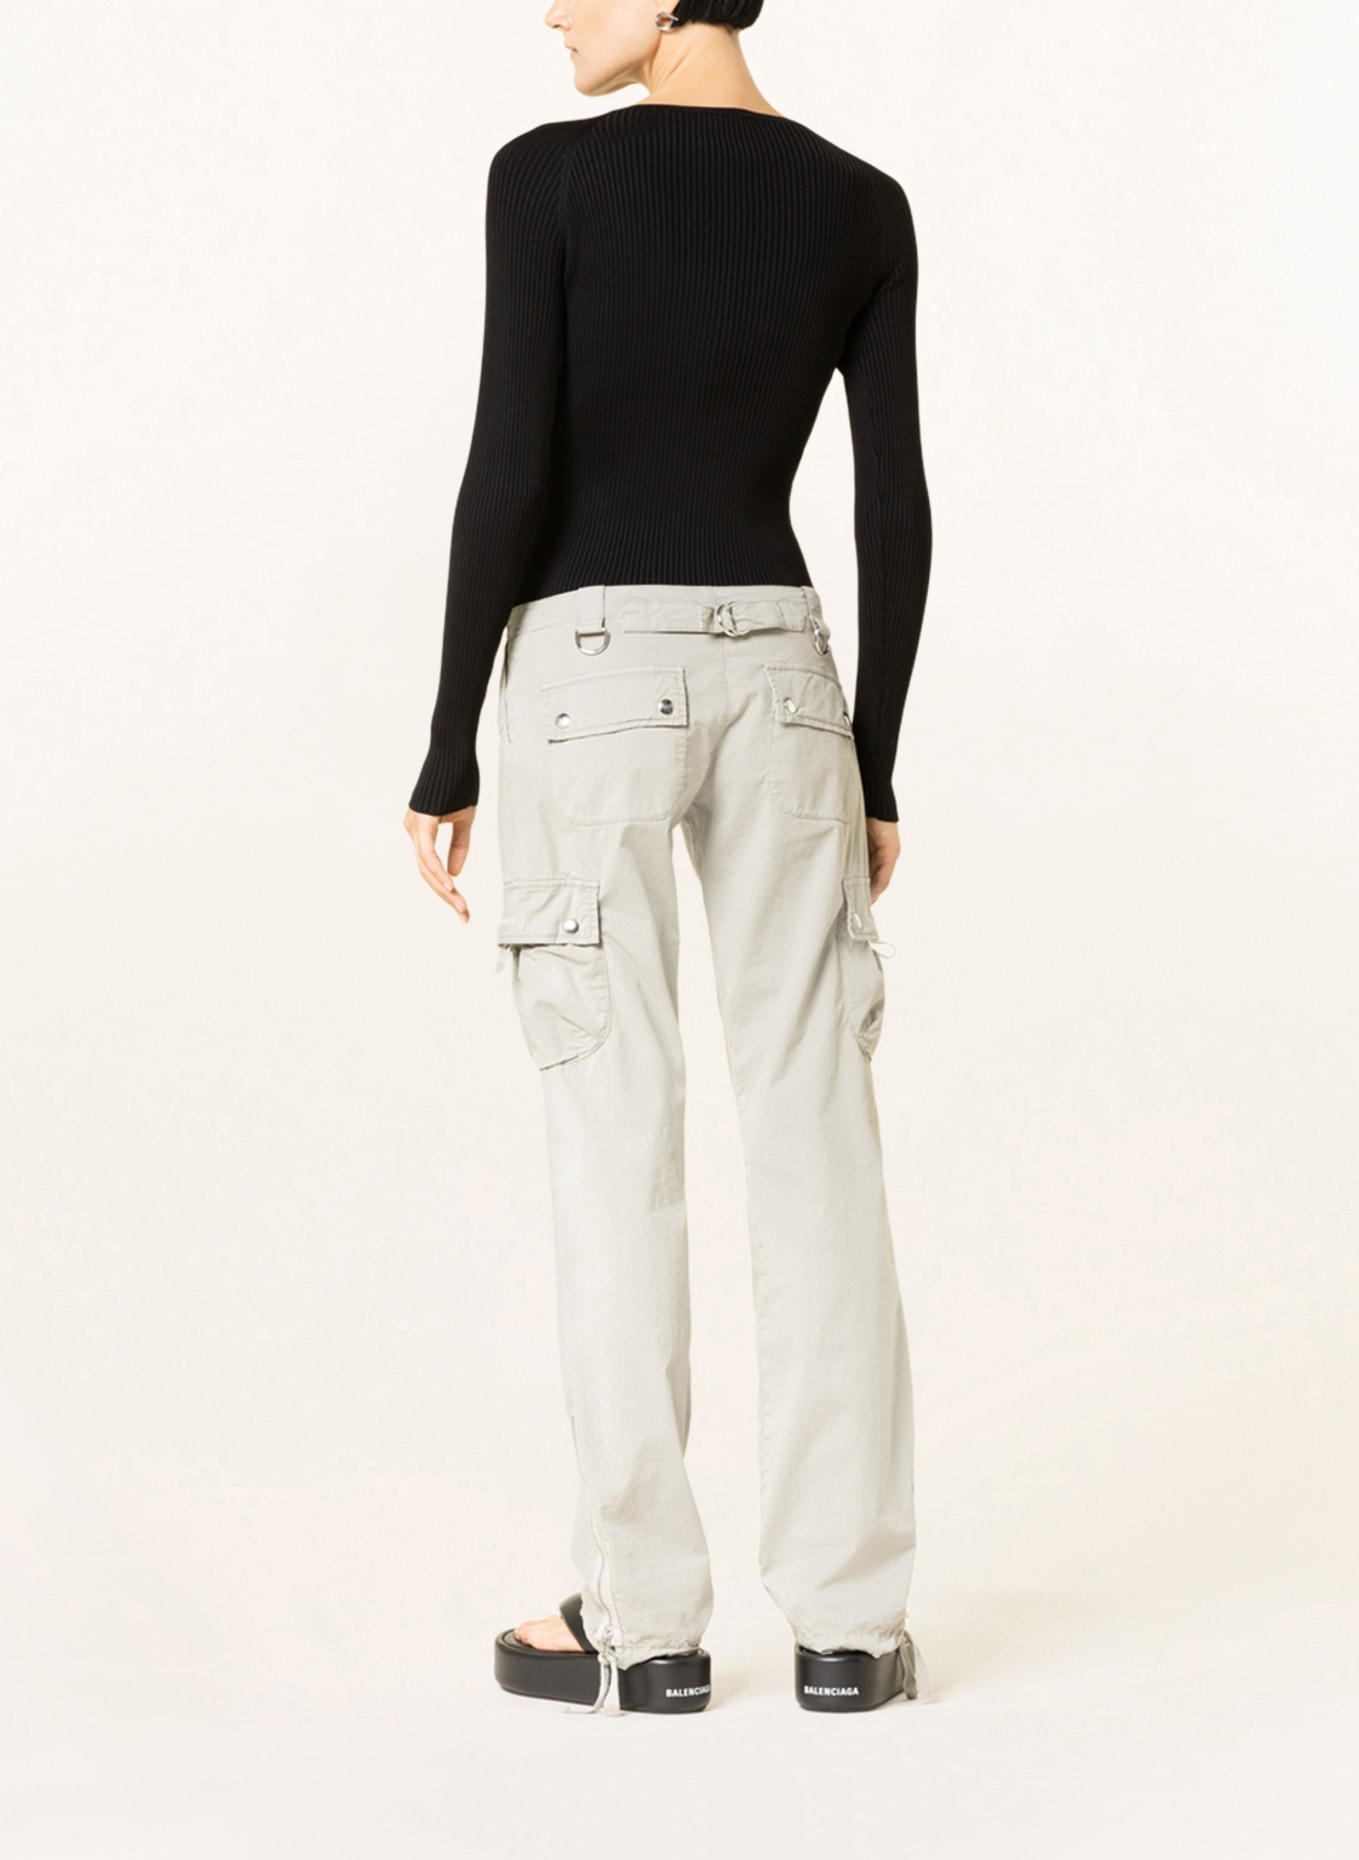 coperni Sweater with cut-out, Color: BLACK (Image 3)